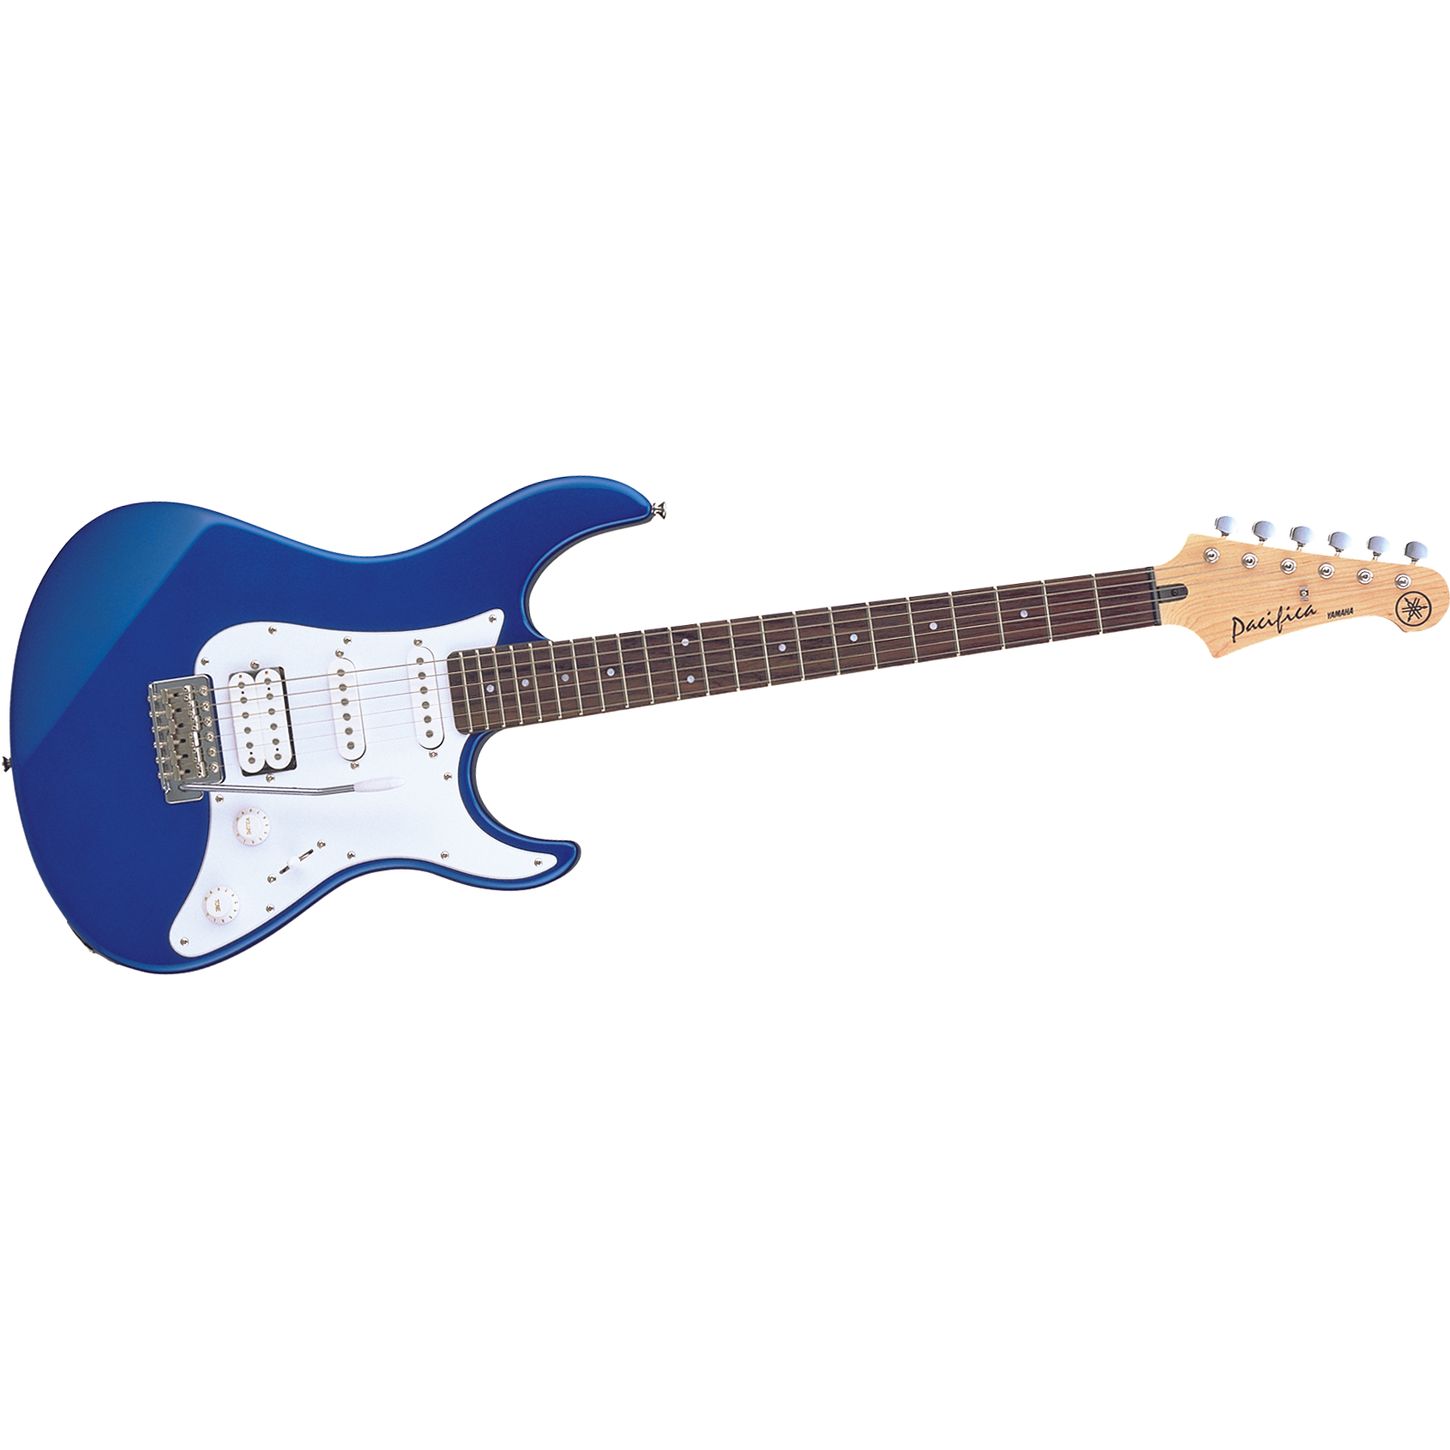 Blue Electric Guitar Clip Art Images   Pictures   Becuo